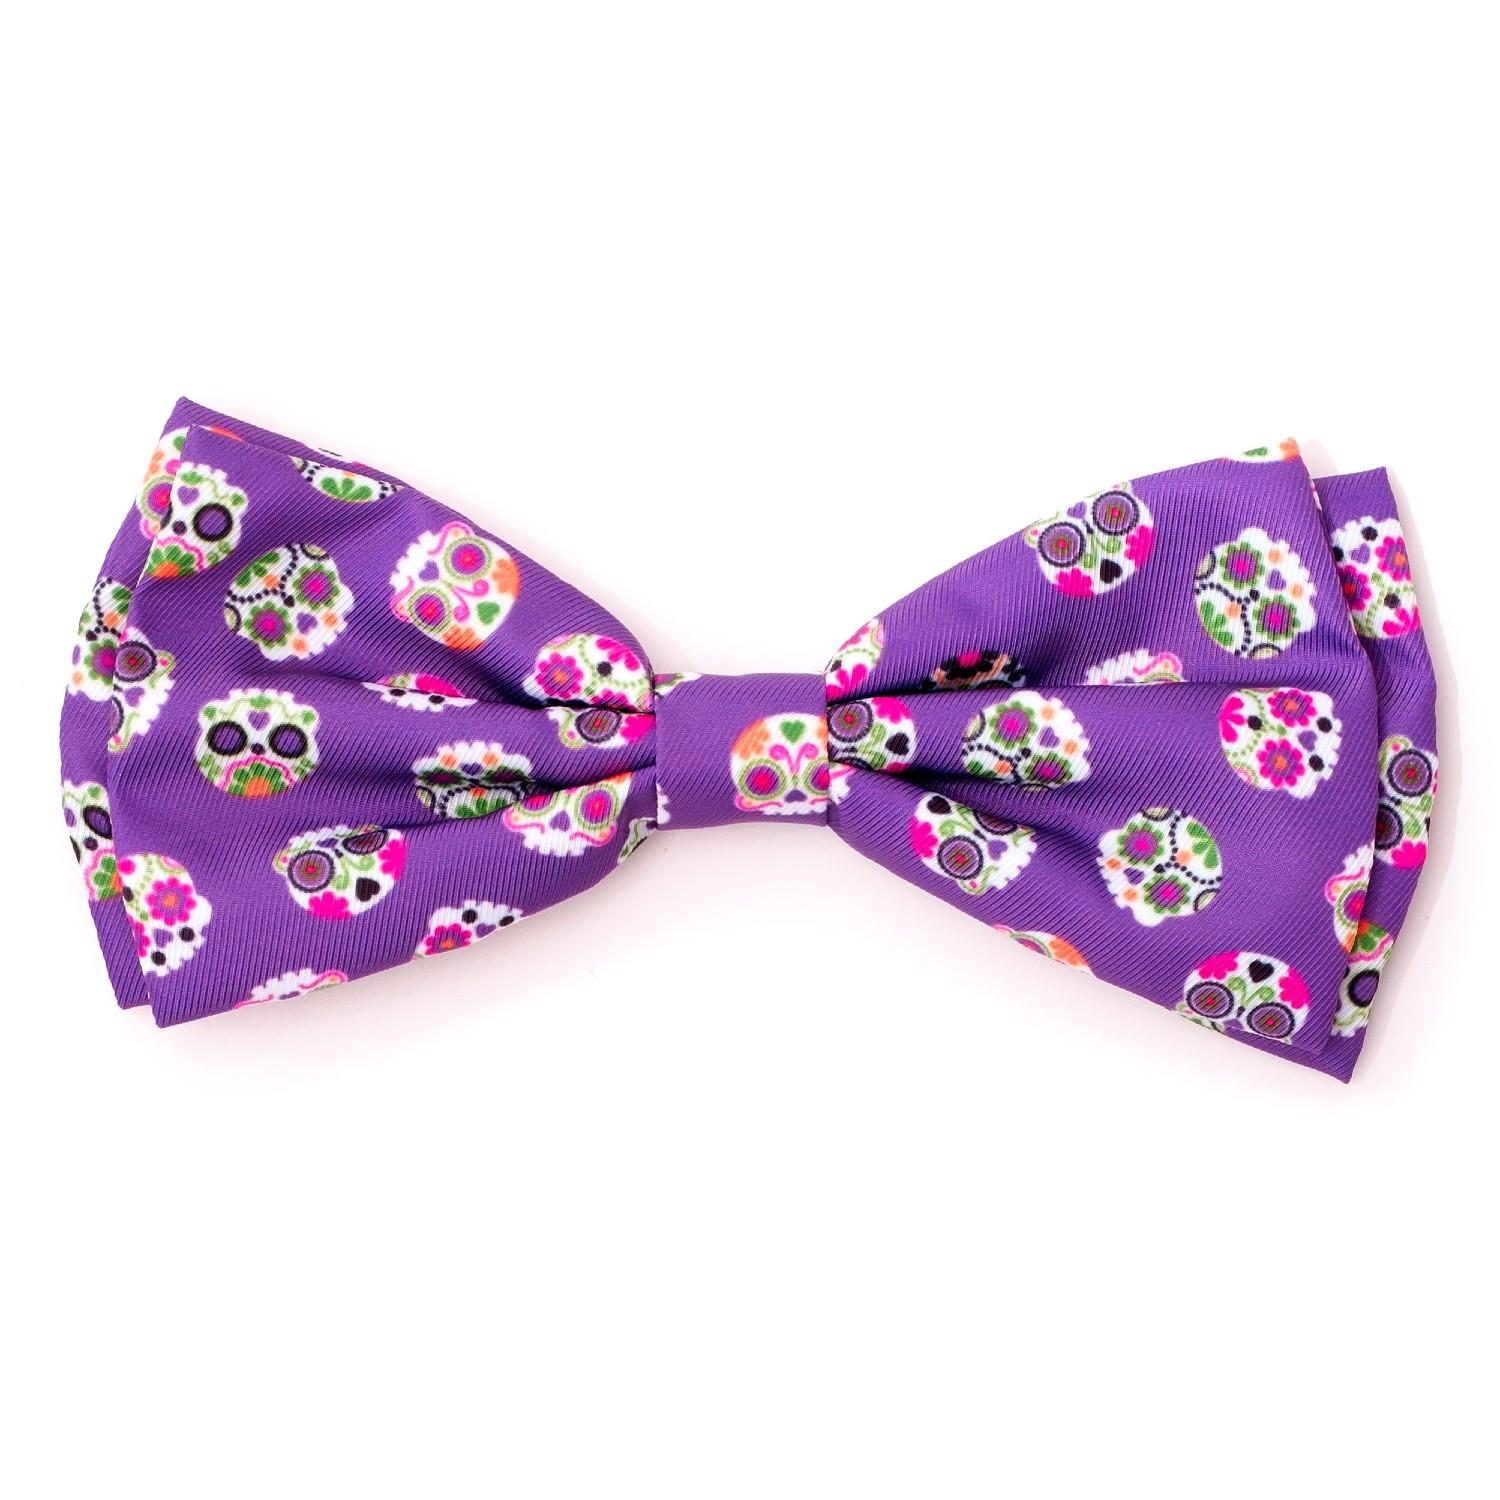 Worthy Dog Halloween Dog and Cat Bow Tie Collar Attachment - Skeletons Purple